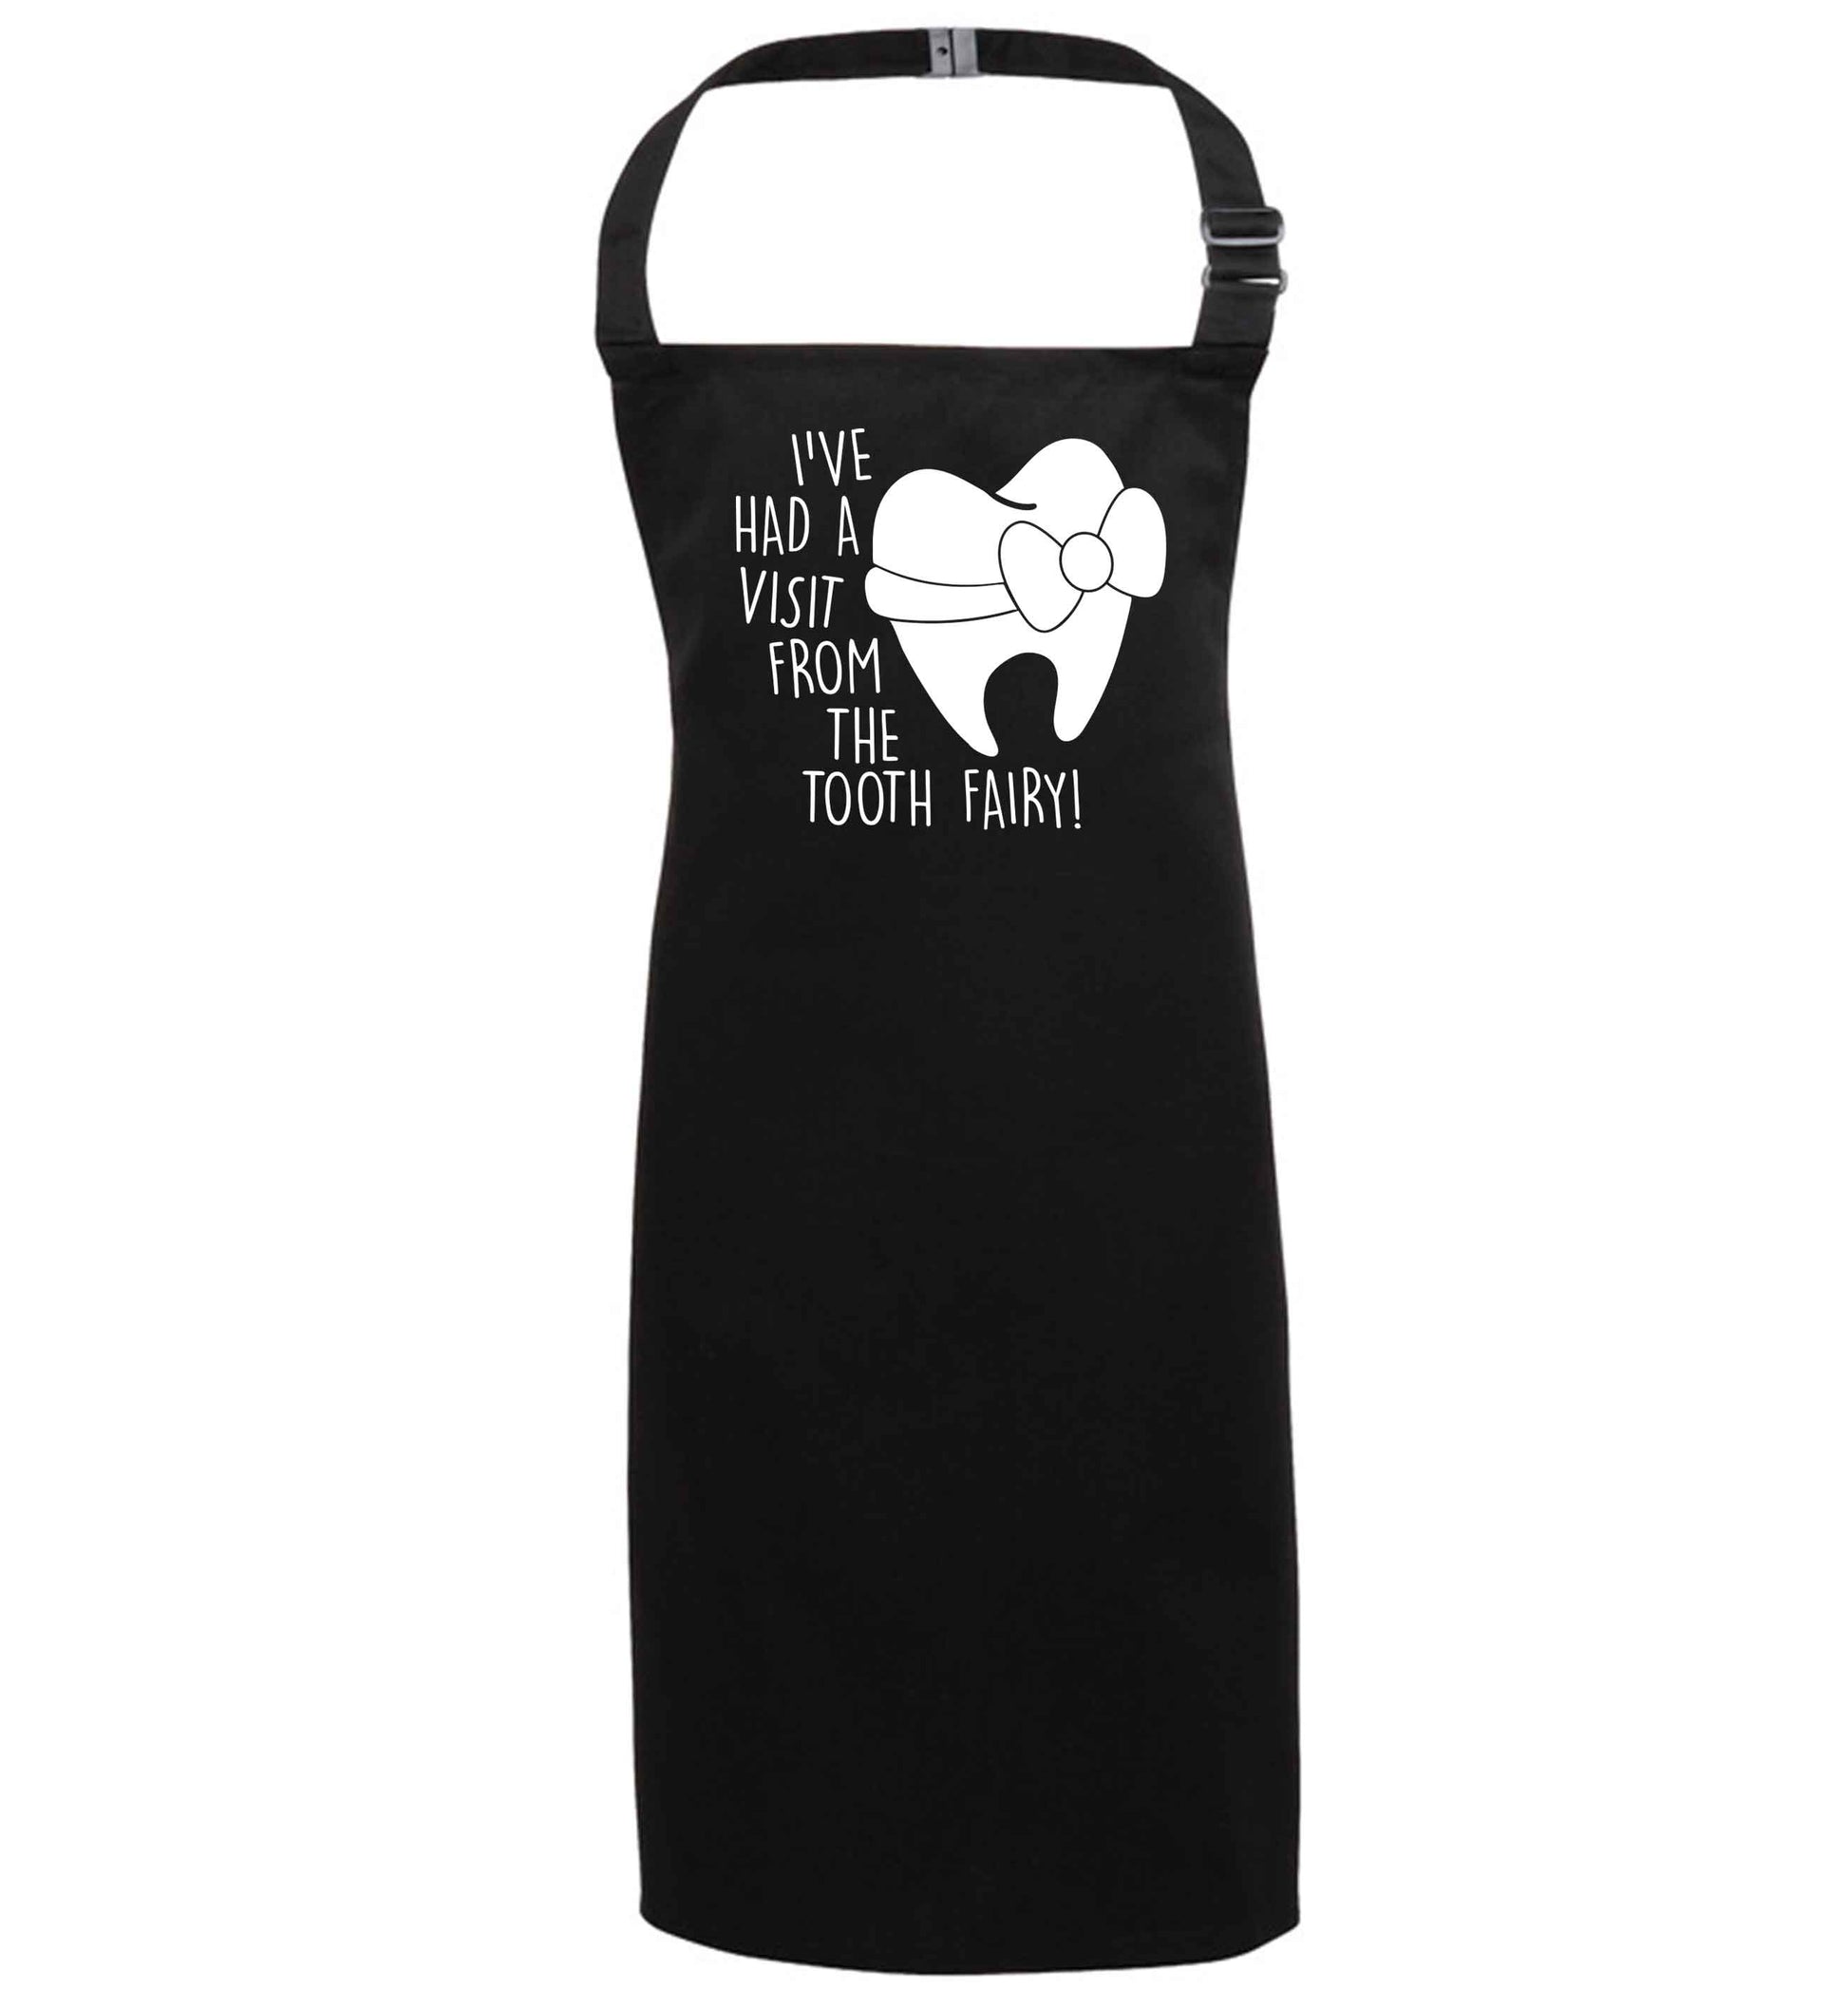 Visit From Tooth Fairy black apron 7-10 years